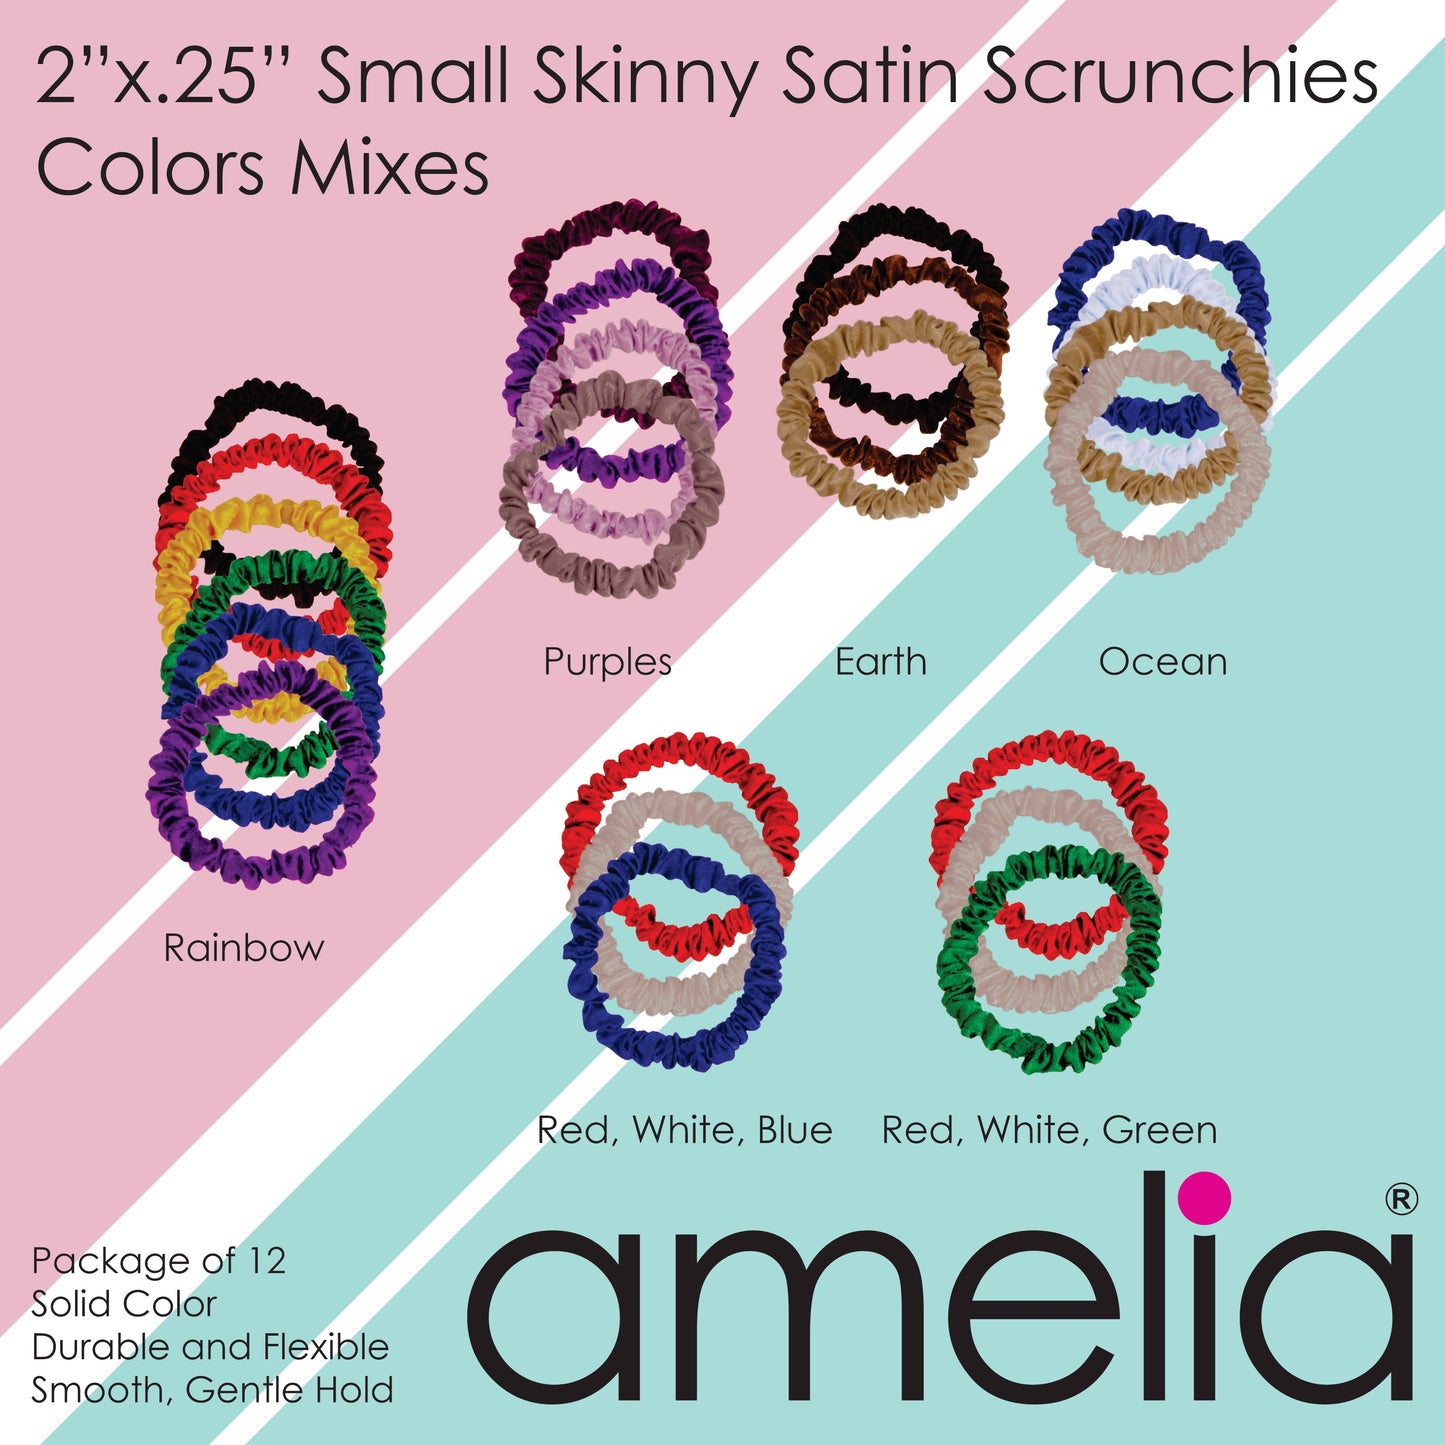 Amelia Beauty, Lime Skinny Satin Scrunchies, 2in Diameter, Gentle and Strong Hold, No Snag, No Dents or Creases. 12 Pack